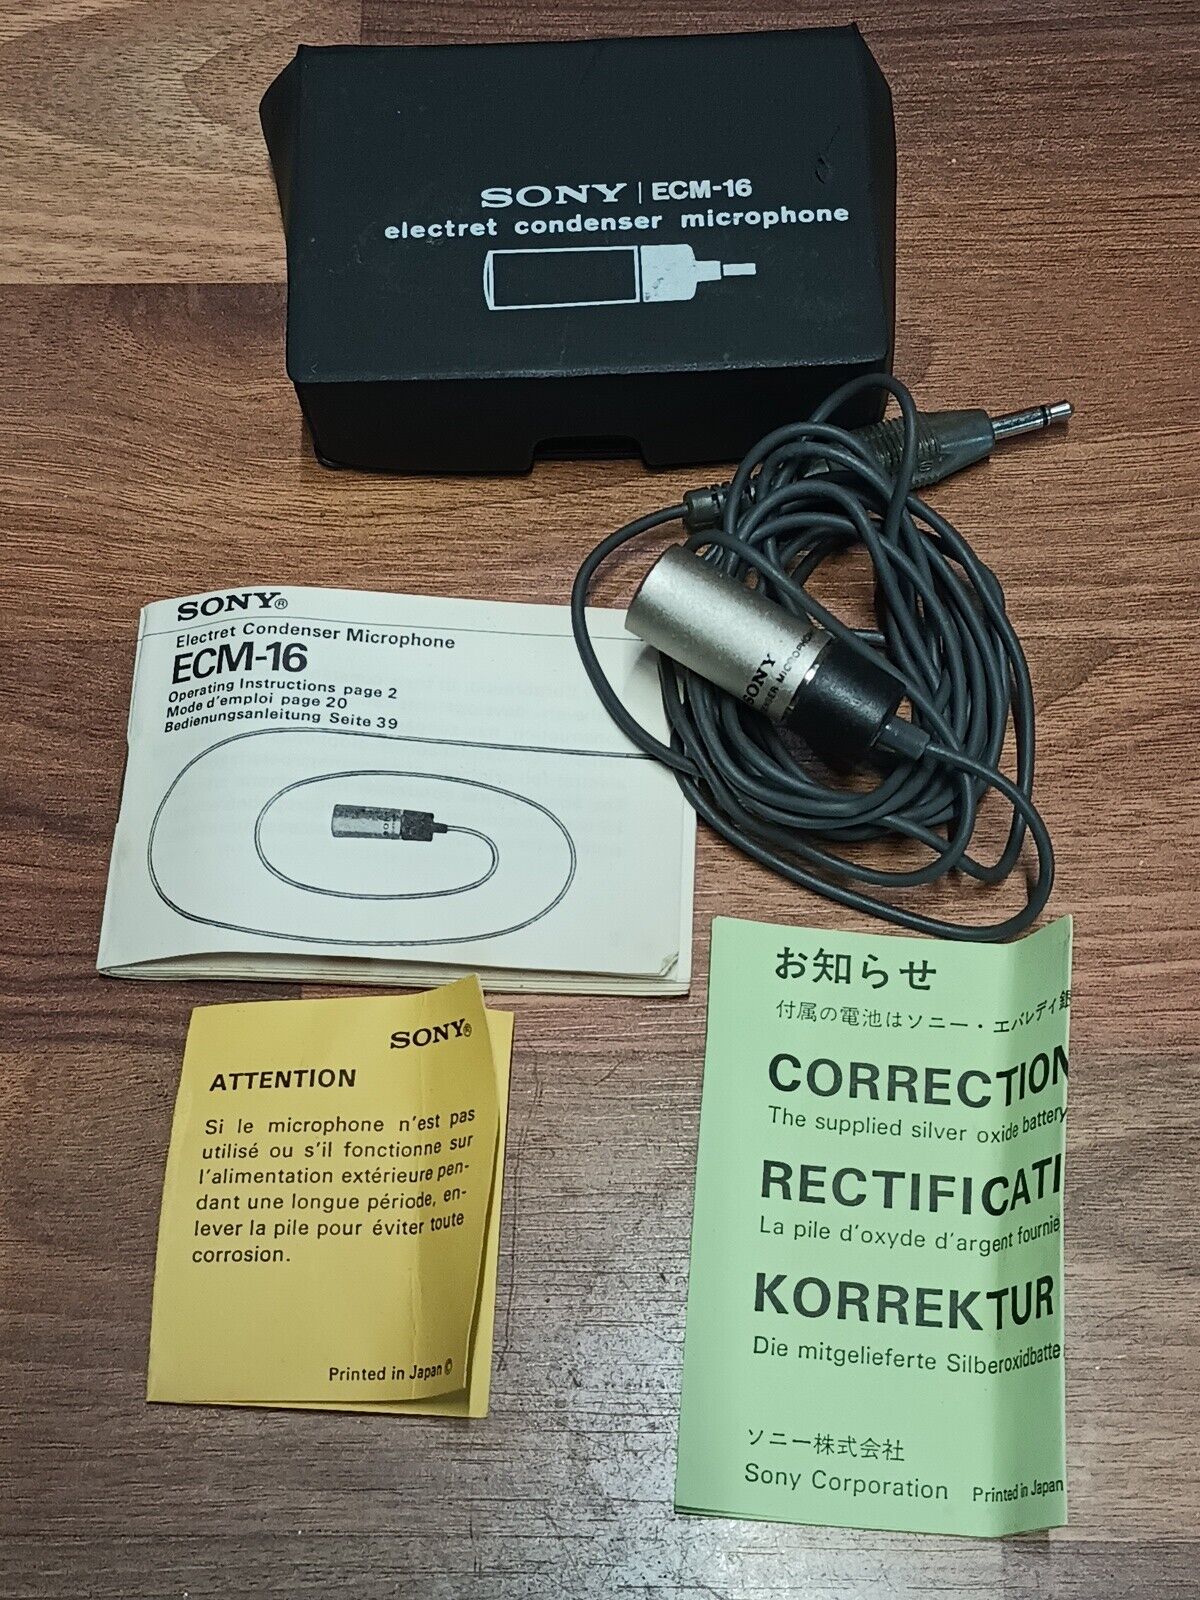 Sony Ecm-16m Electret Condenser Microphone With manual and Box -  